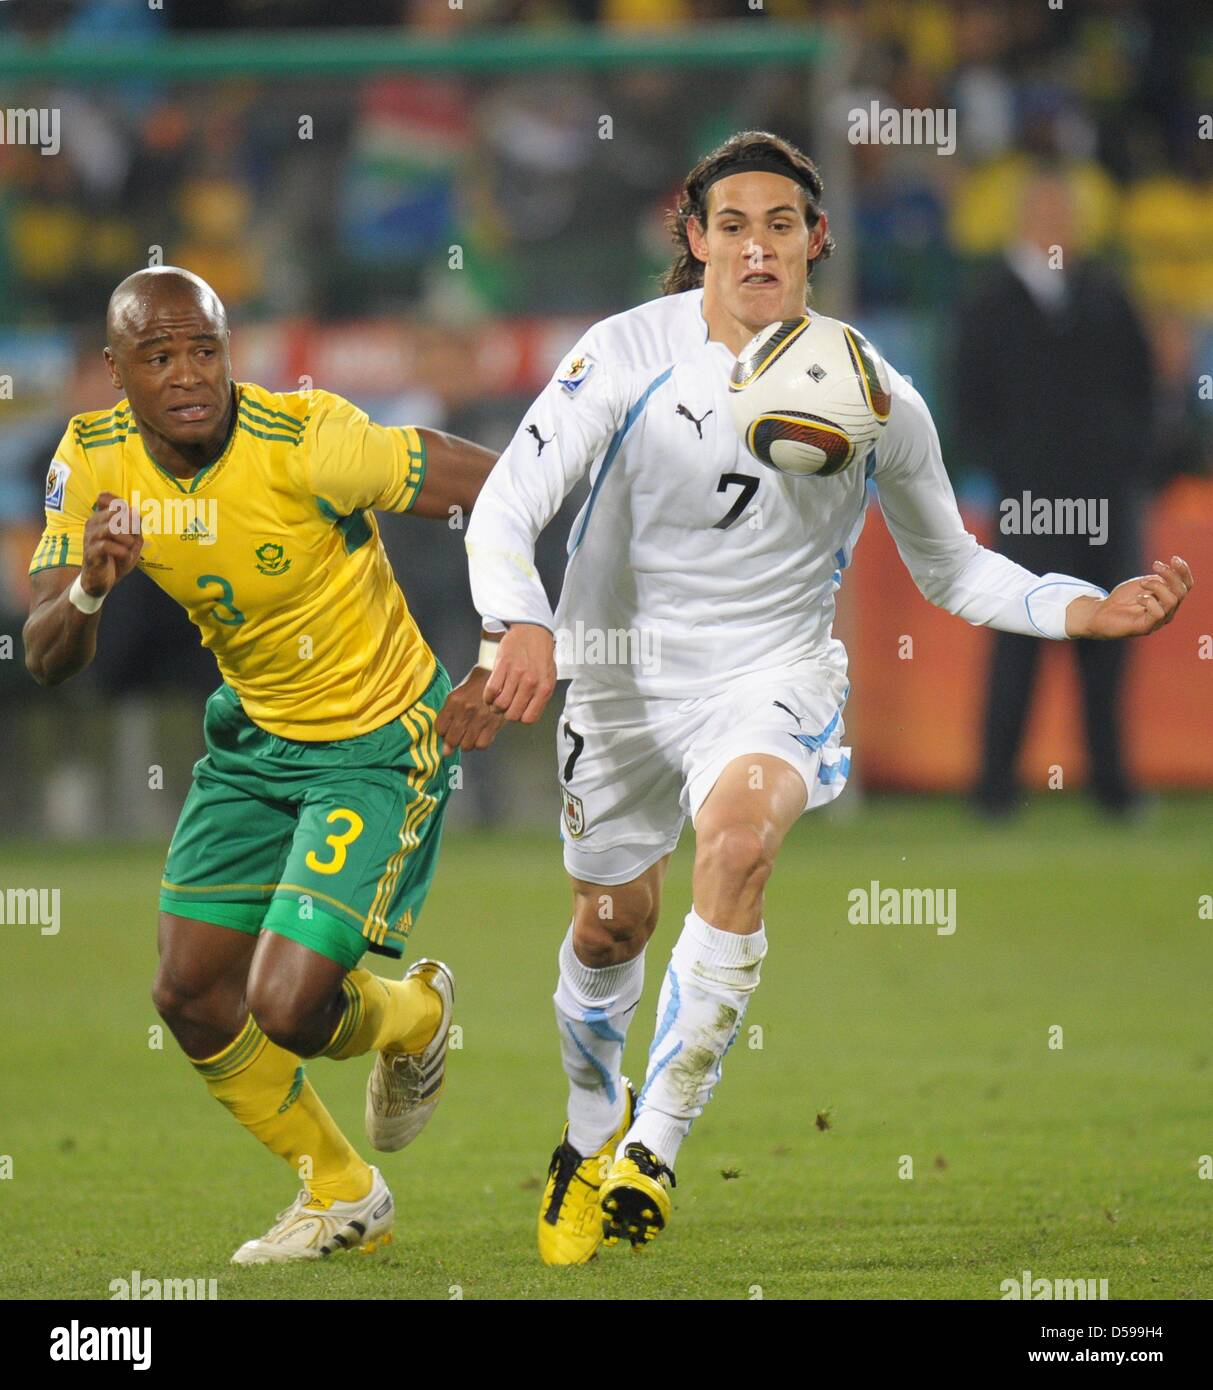 Tsepo Masilela (L) of South Africa vies with Edinson Cavani of Uruguay during the FIFA World Cup 2010 group A match between South Africa and Uruguay at Loftus Versfeld Stadium in Pretoria, South Africa 16 June 2010. Photo: Ronald Wittek dpa - Please refer to http://dpaq.de/FIFA-WM2010-TC Stock Photo